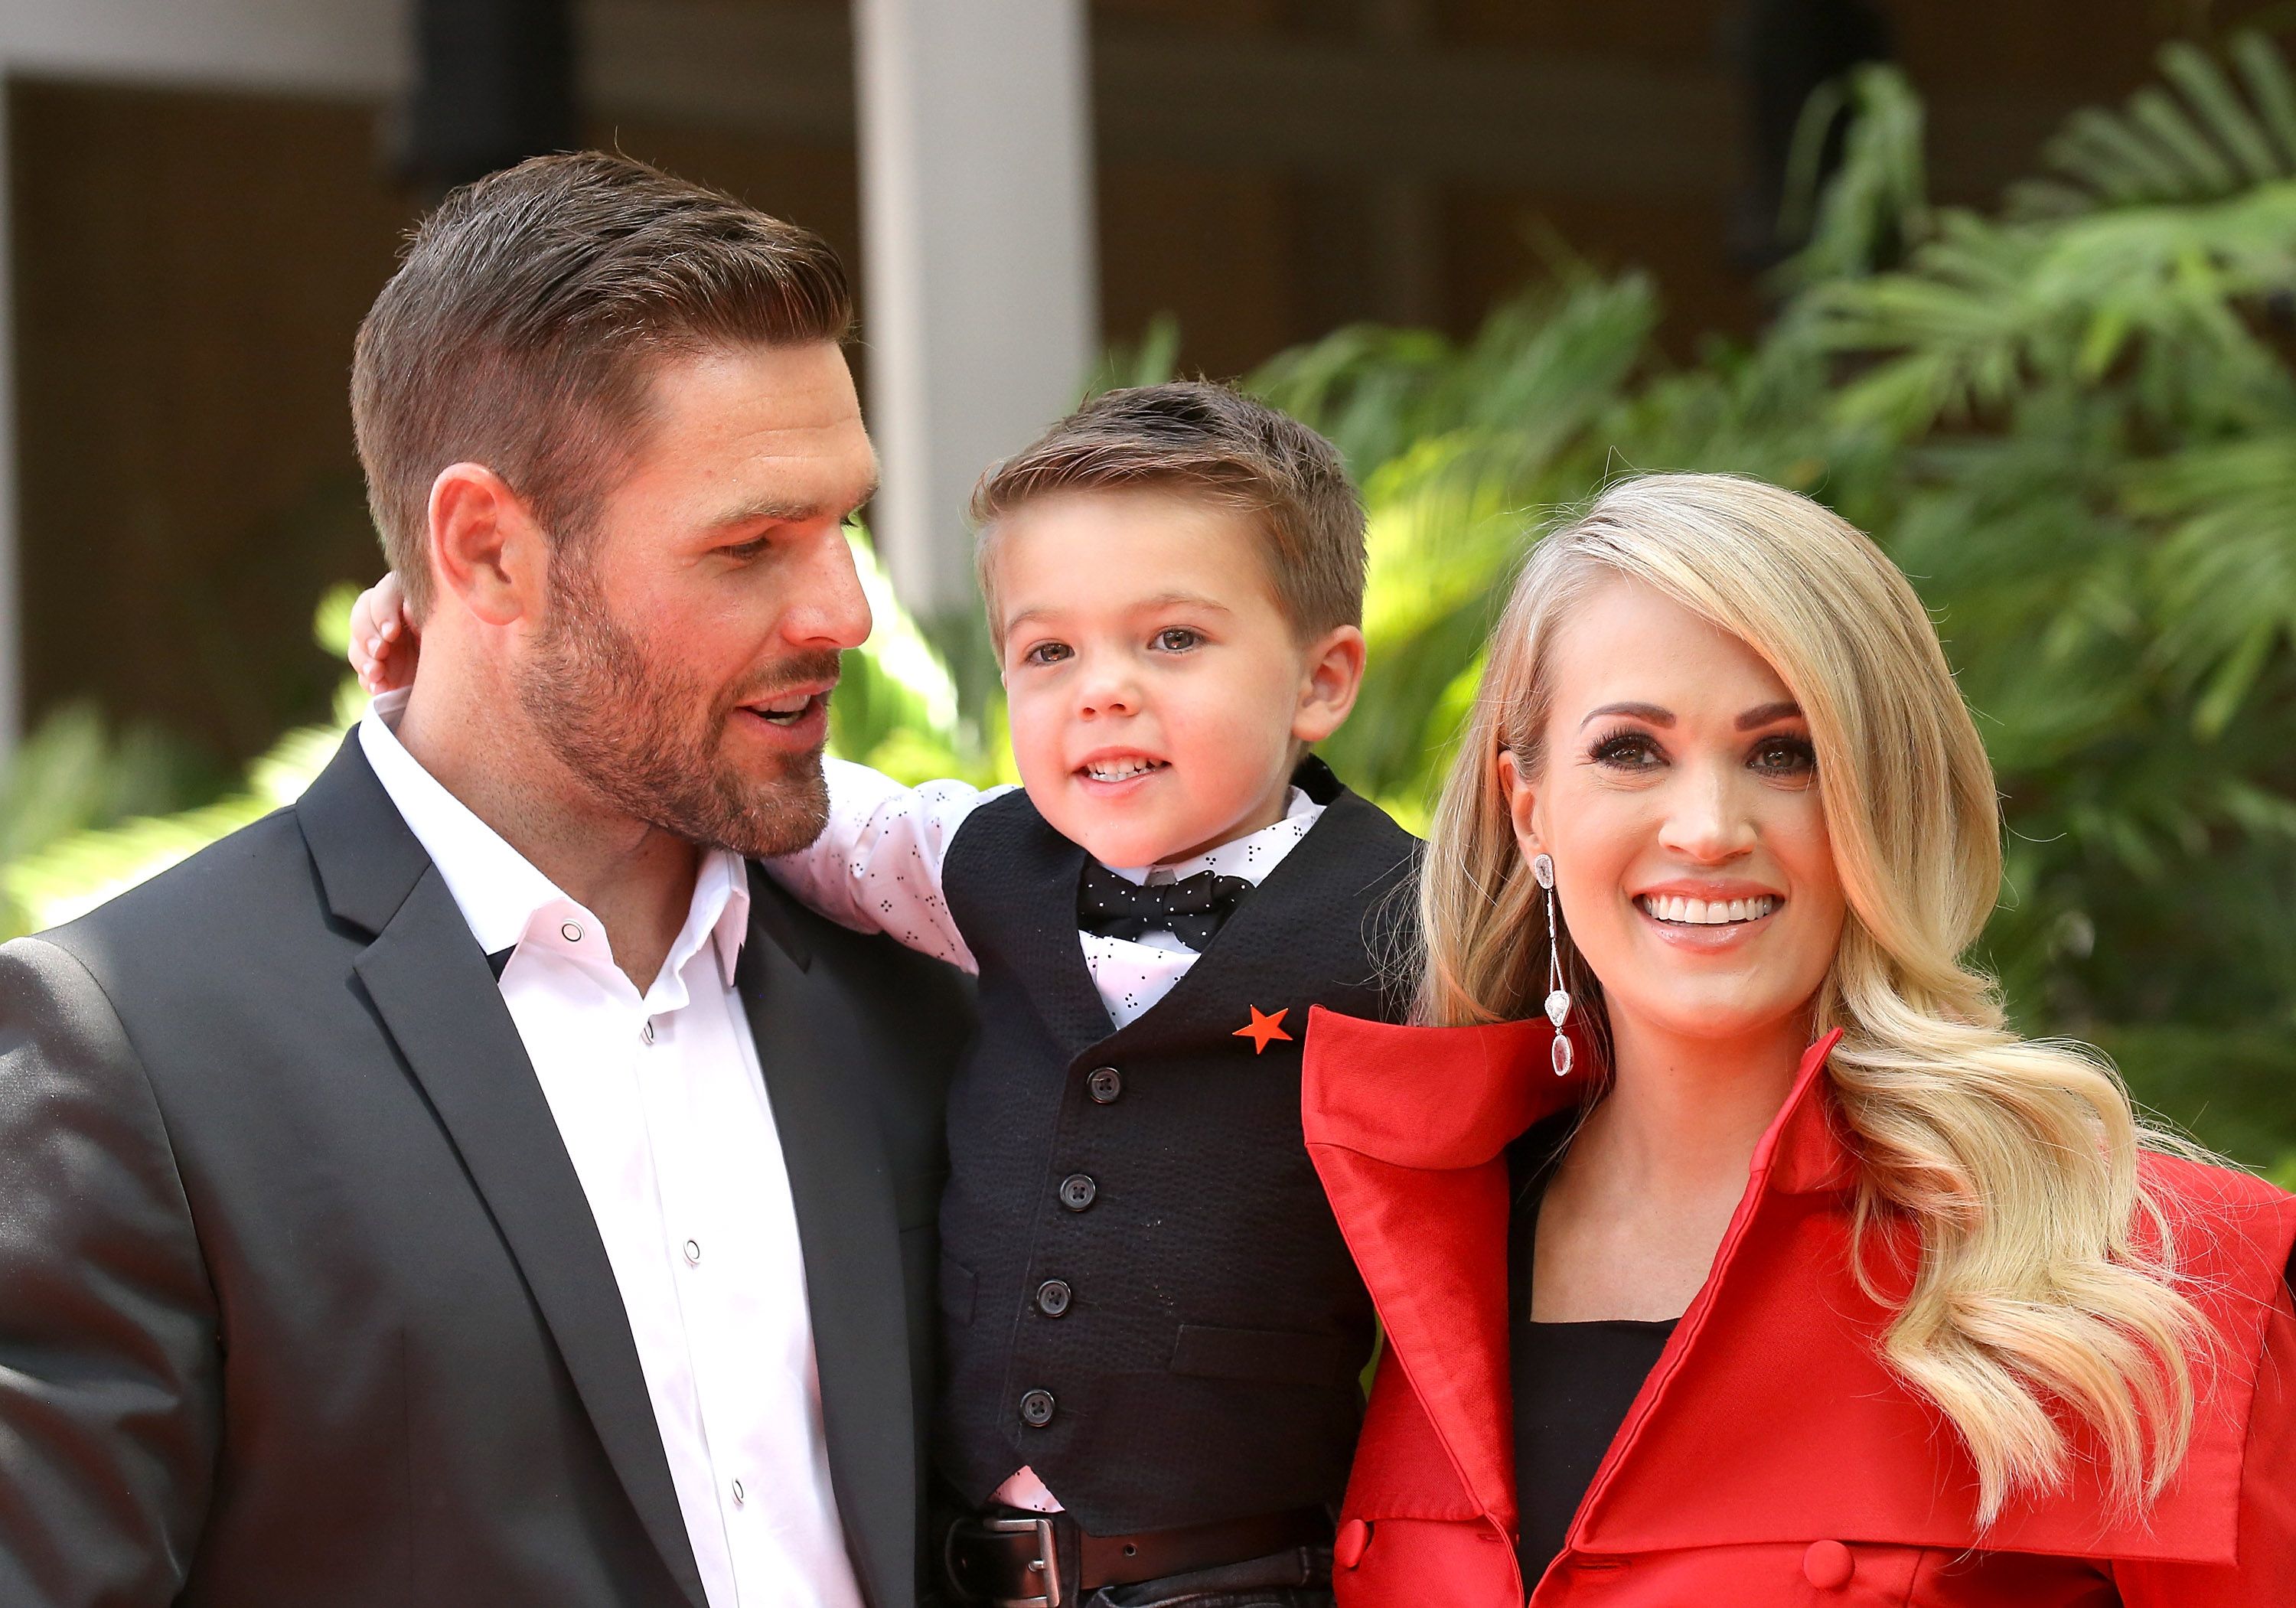 Carrie Underwood, Mike Fisher and their son, Isaiah Michael Fisher attend the ceremony honoring Carrie Underwood with a Star on The Hollywood Walk of Fame held on September 20, 2018 in California. | Photo: Getty Images 